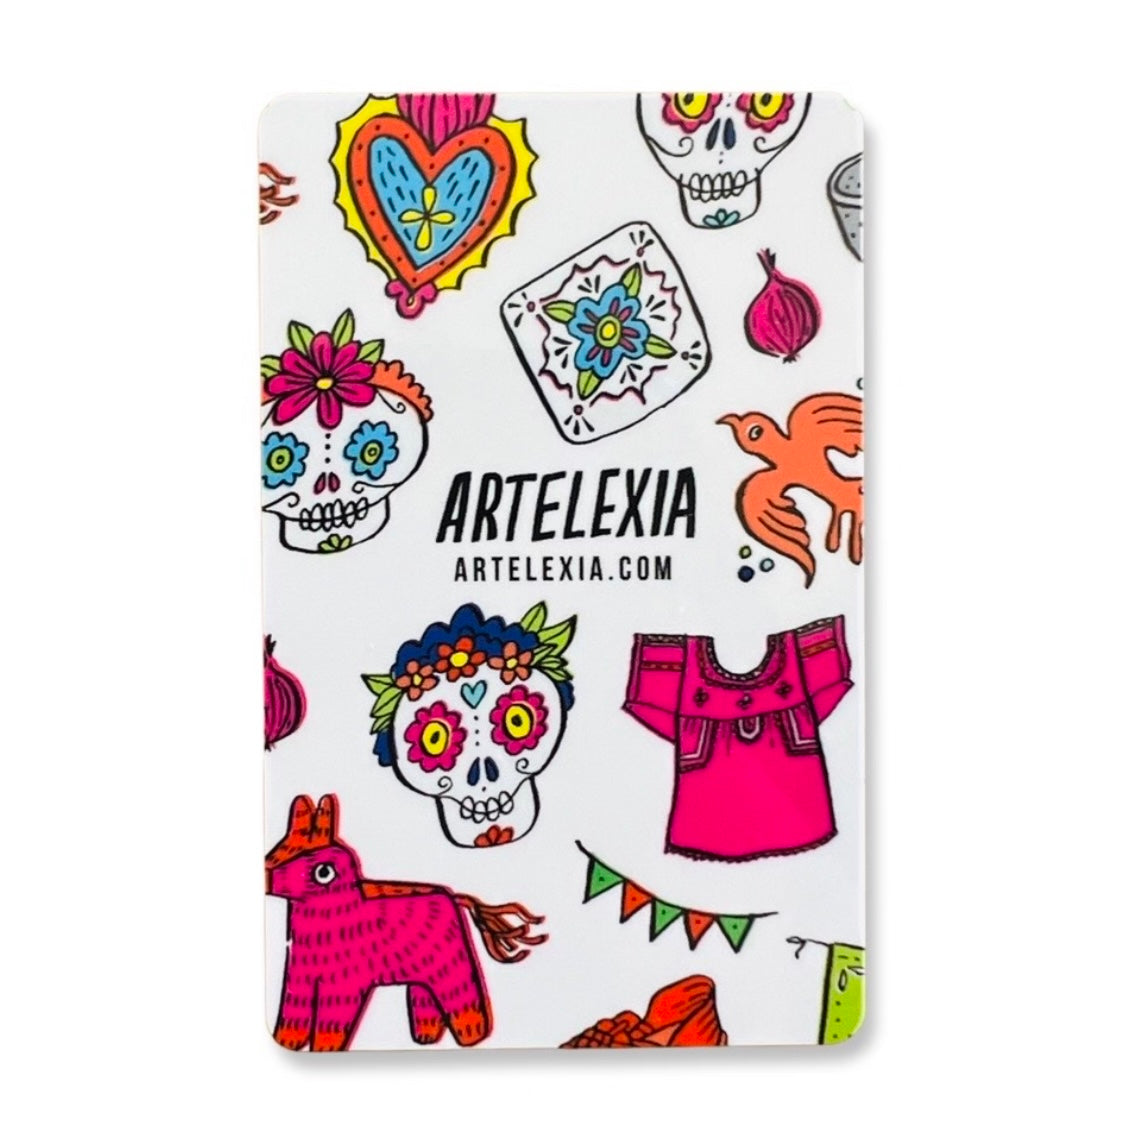 Gift card with Artelexia store name, website, and logos. 